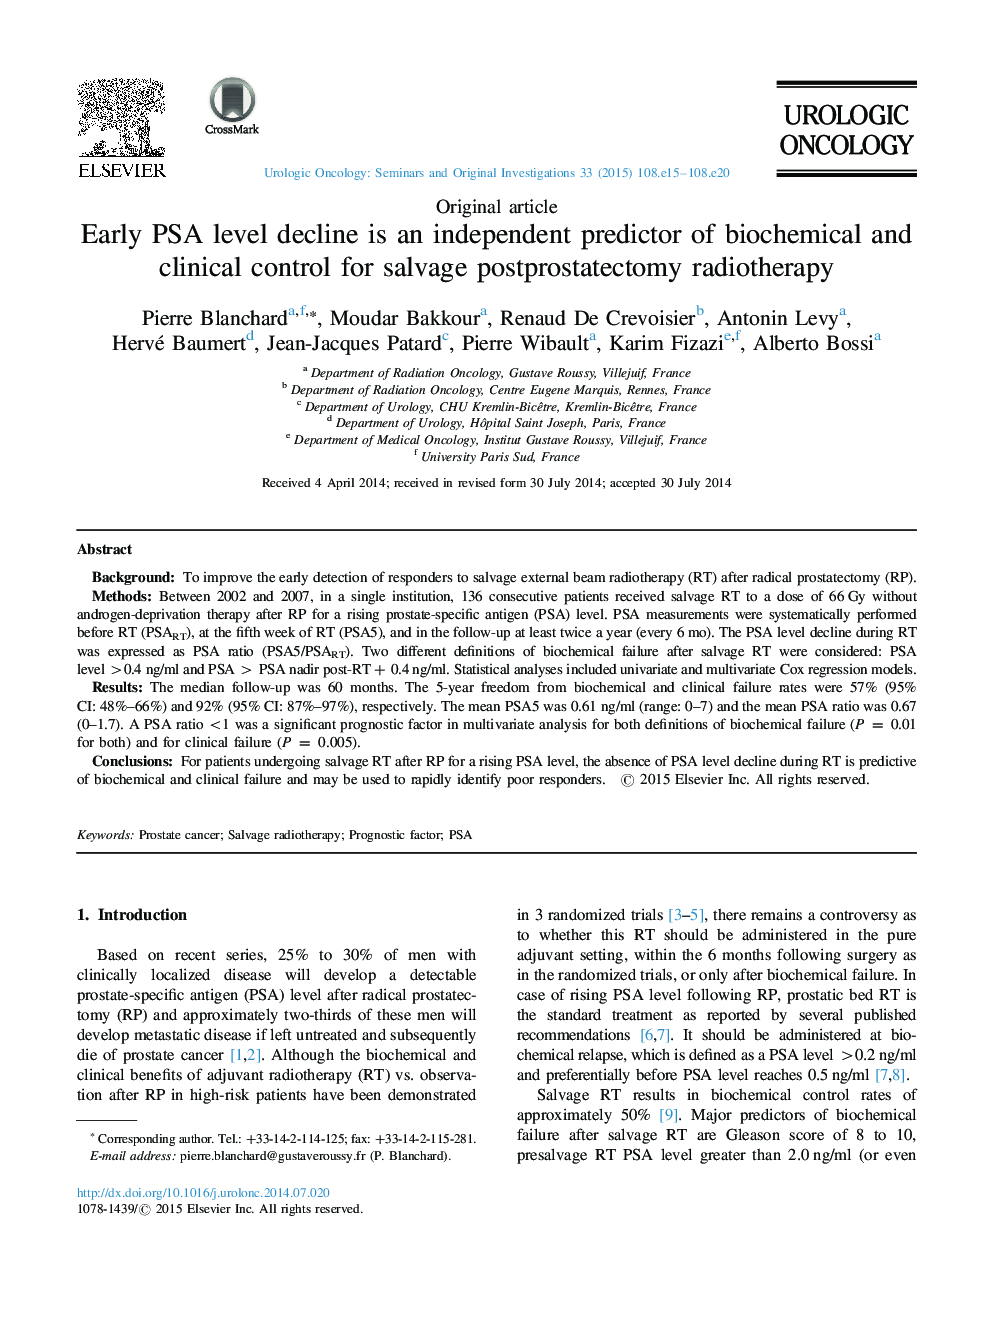 Early PSA level decline is an independent predictor of biochemical and clinical control for salvage postprostatectomy radiotherapy